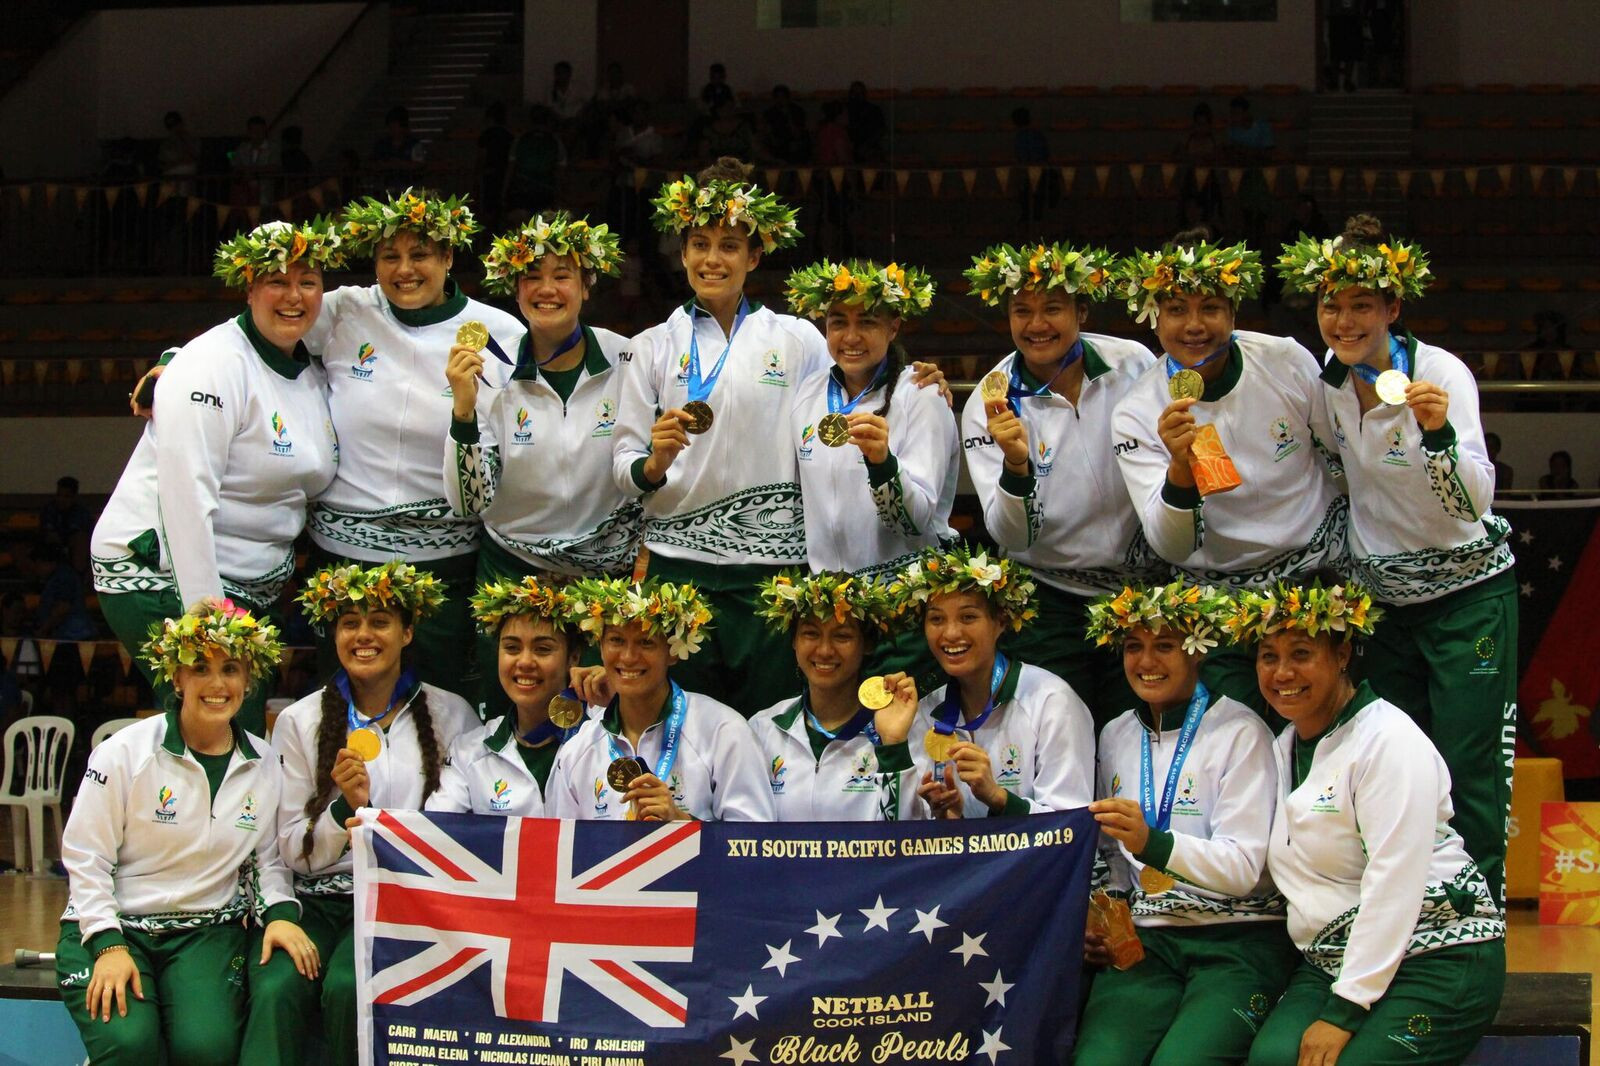 Cook Islands won 44-43 to earn their first netball gold medal since 1991 ©Games News Service